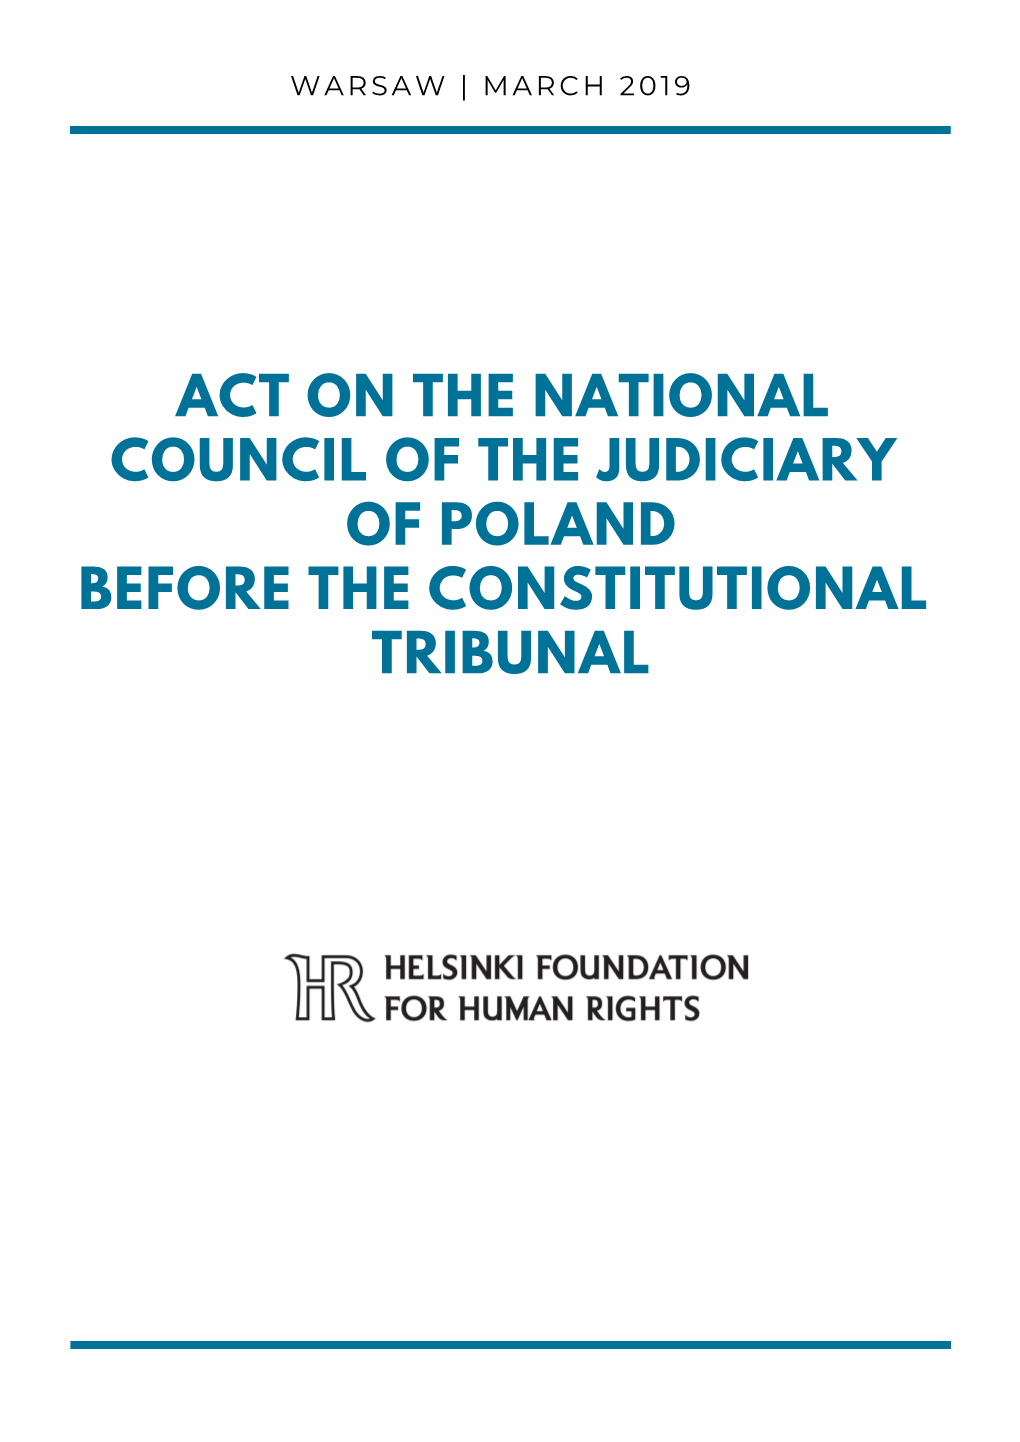 Act on the National Council of the Judiciary of Poland Before the Constitutional Tribunal